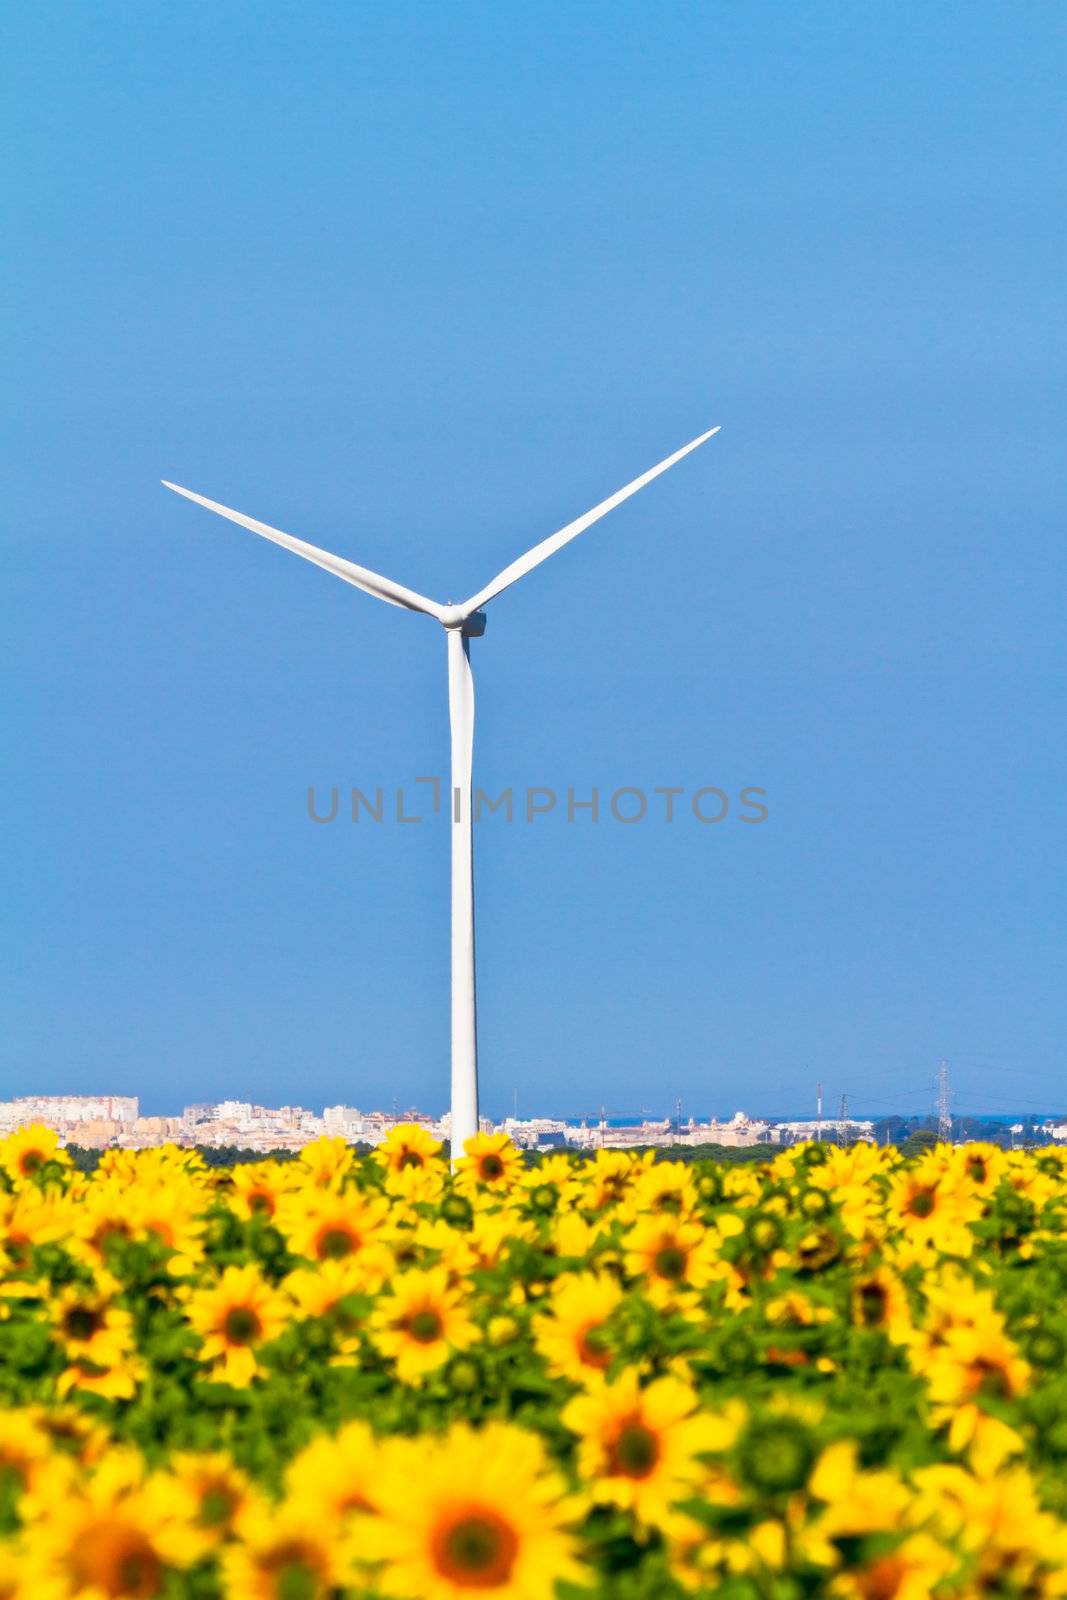 Typical windmill or aerogenerator of aeolian energy and a field of sunflowers